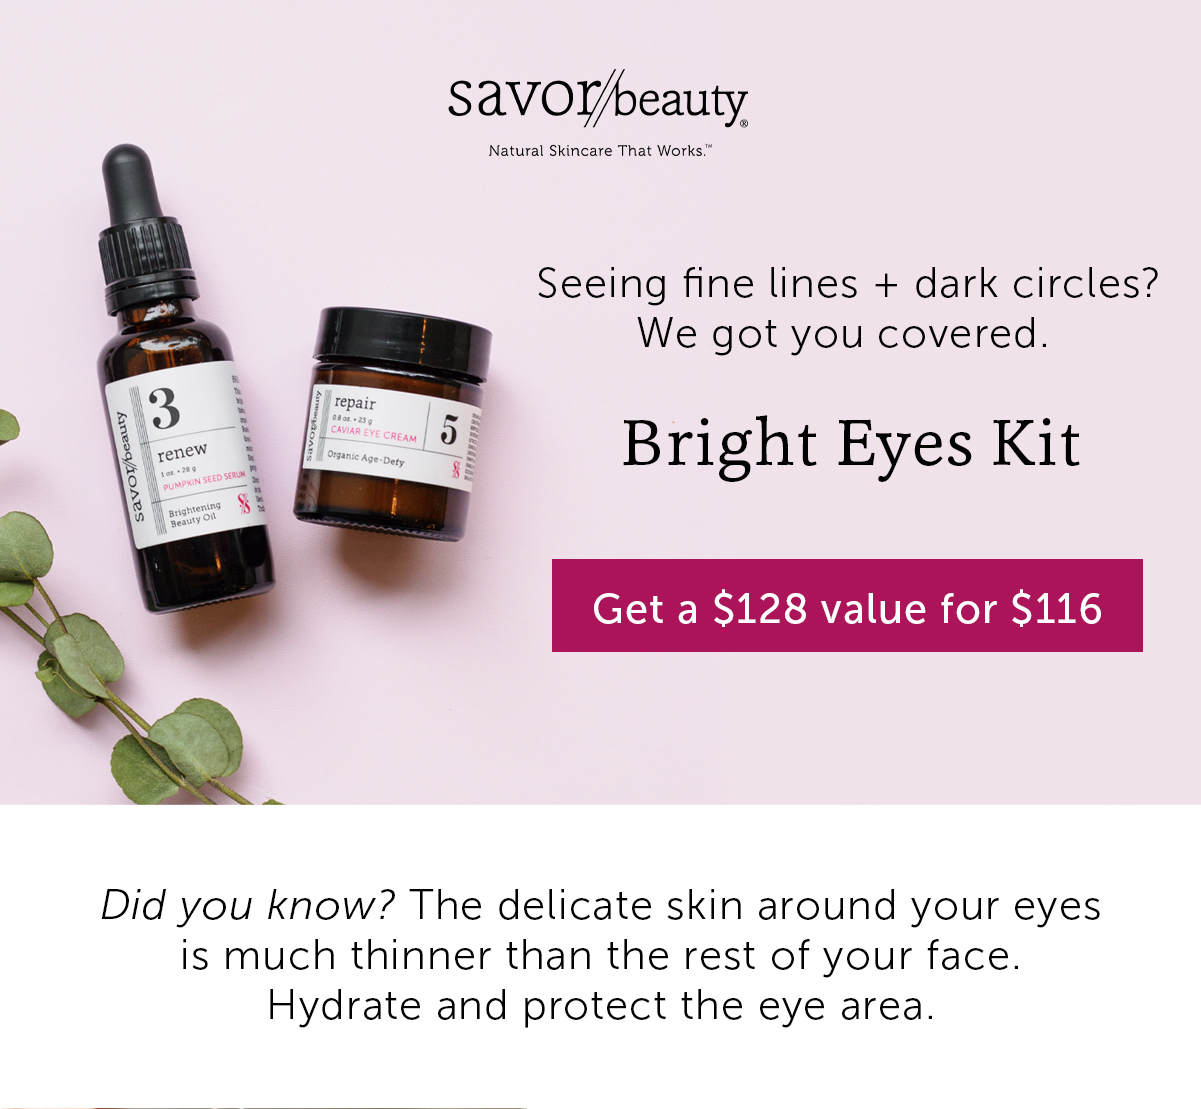 Bright Eyes Kit: Get $128 in value for $116